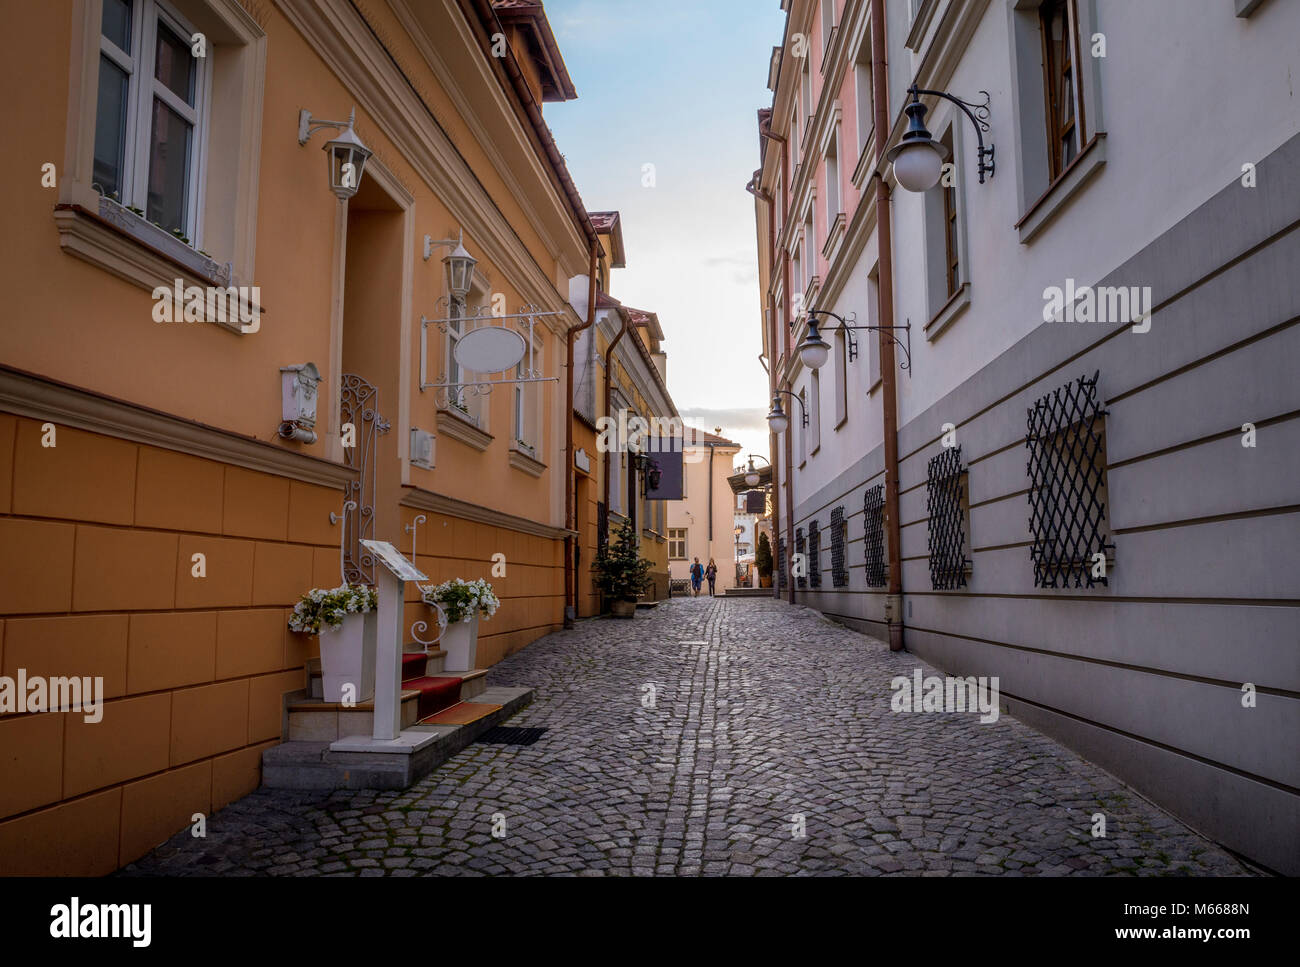 Street in old town of Rzeszow, Poland Stock Photo